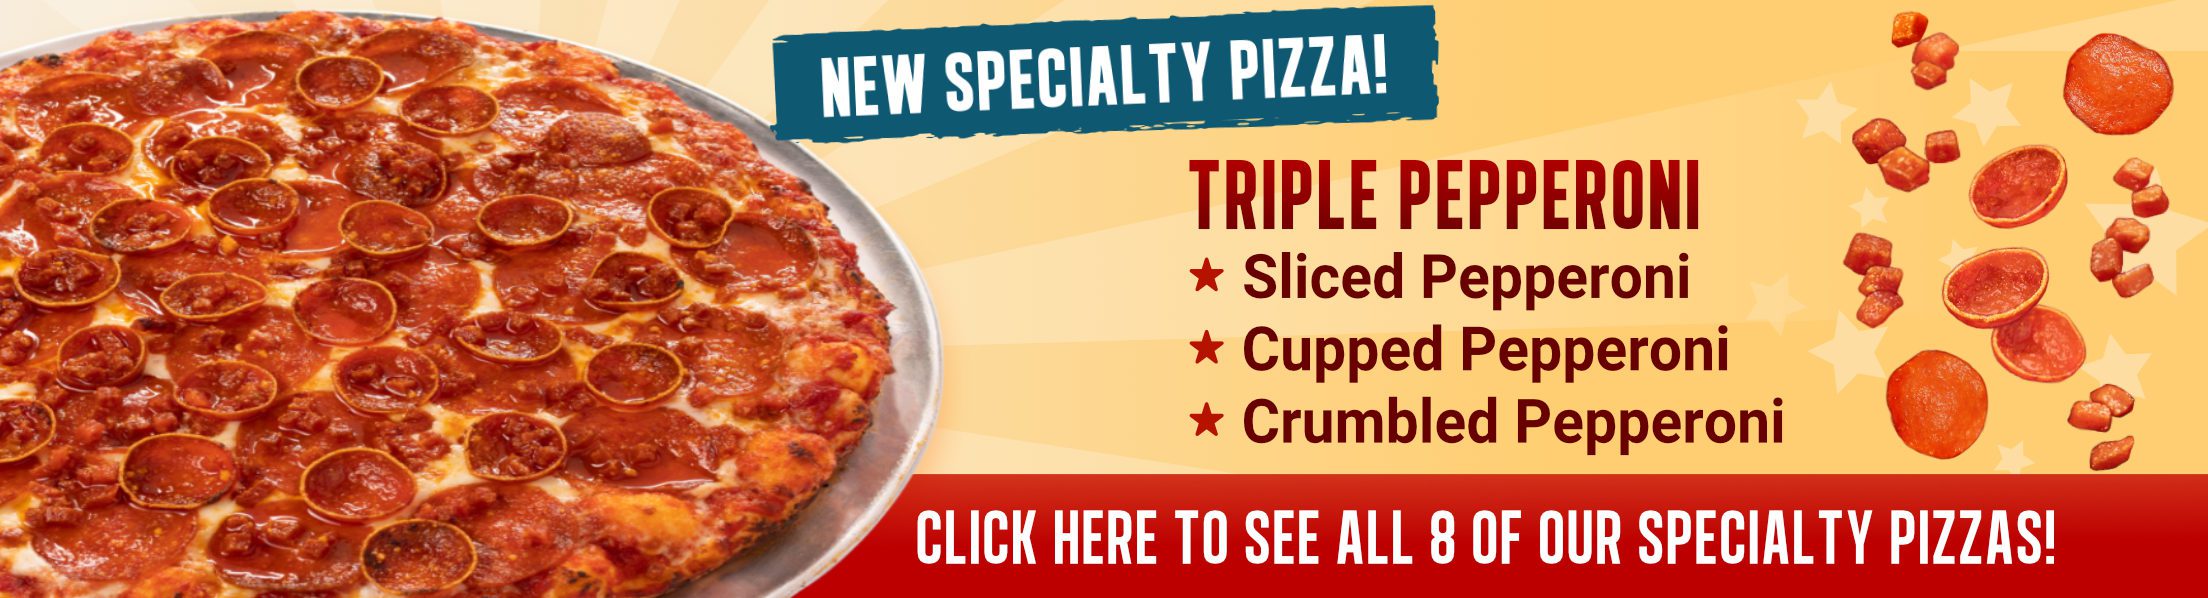 New specialty pizza, triple pepperoni!